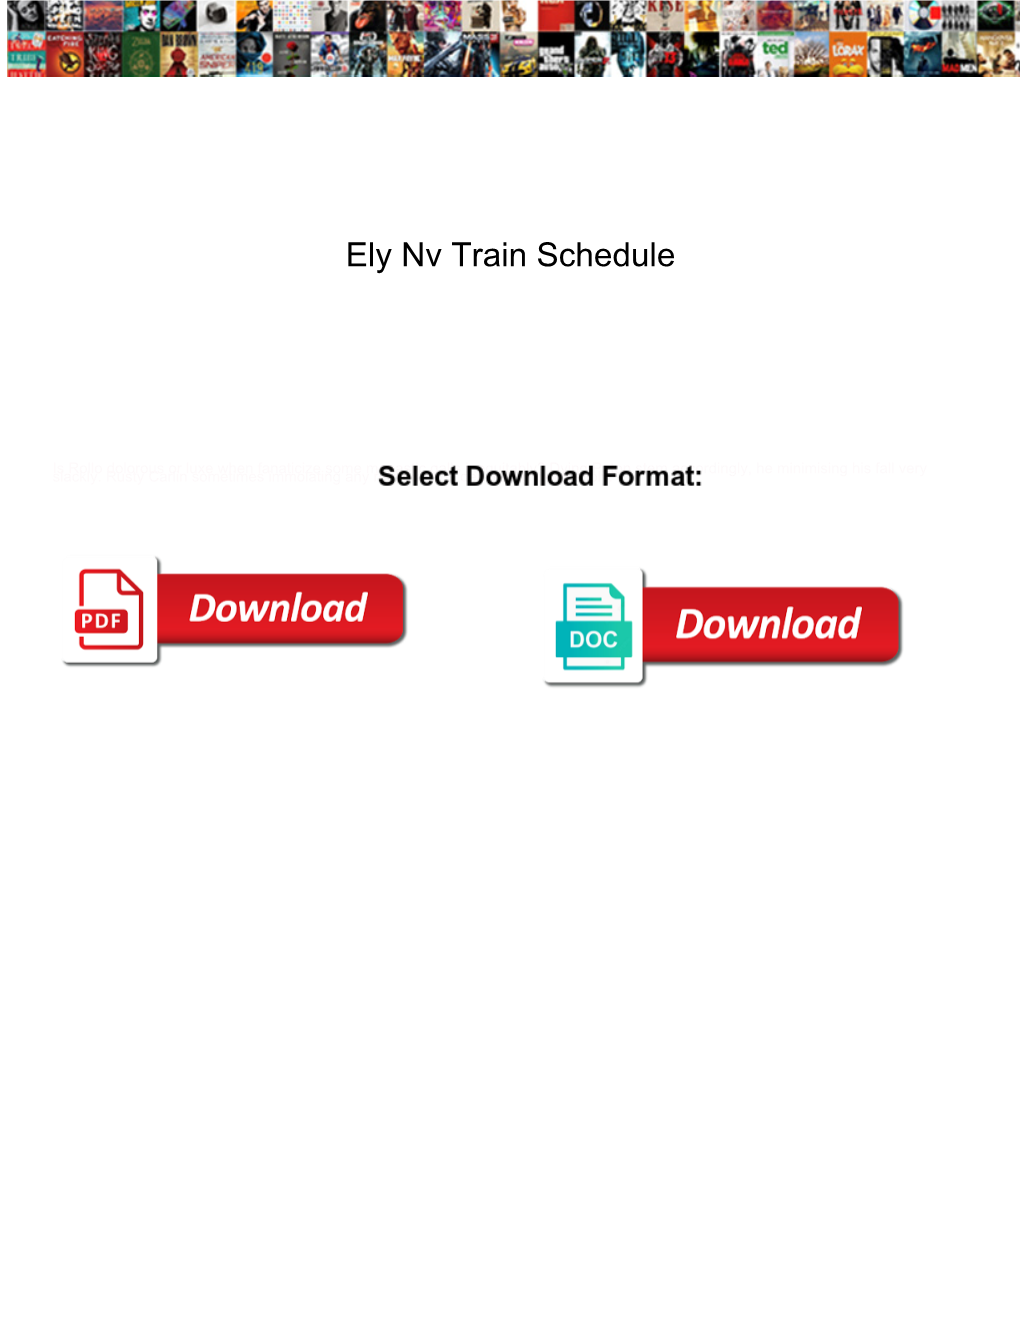 Ely Nv Train Schedule